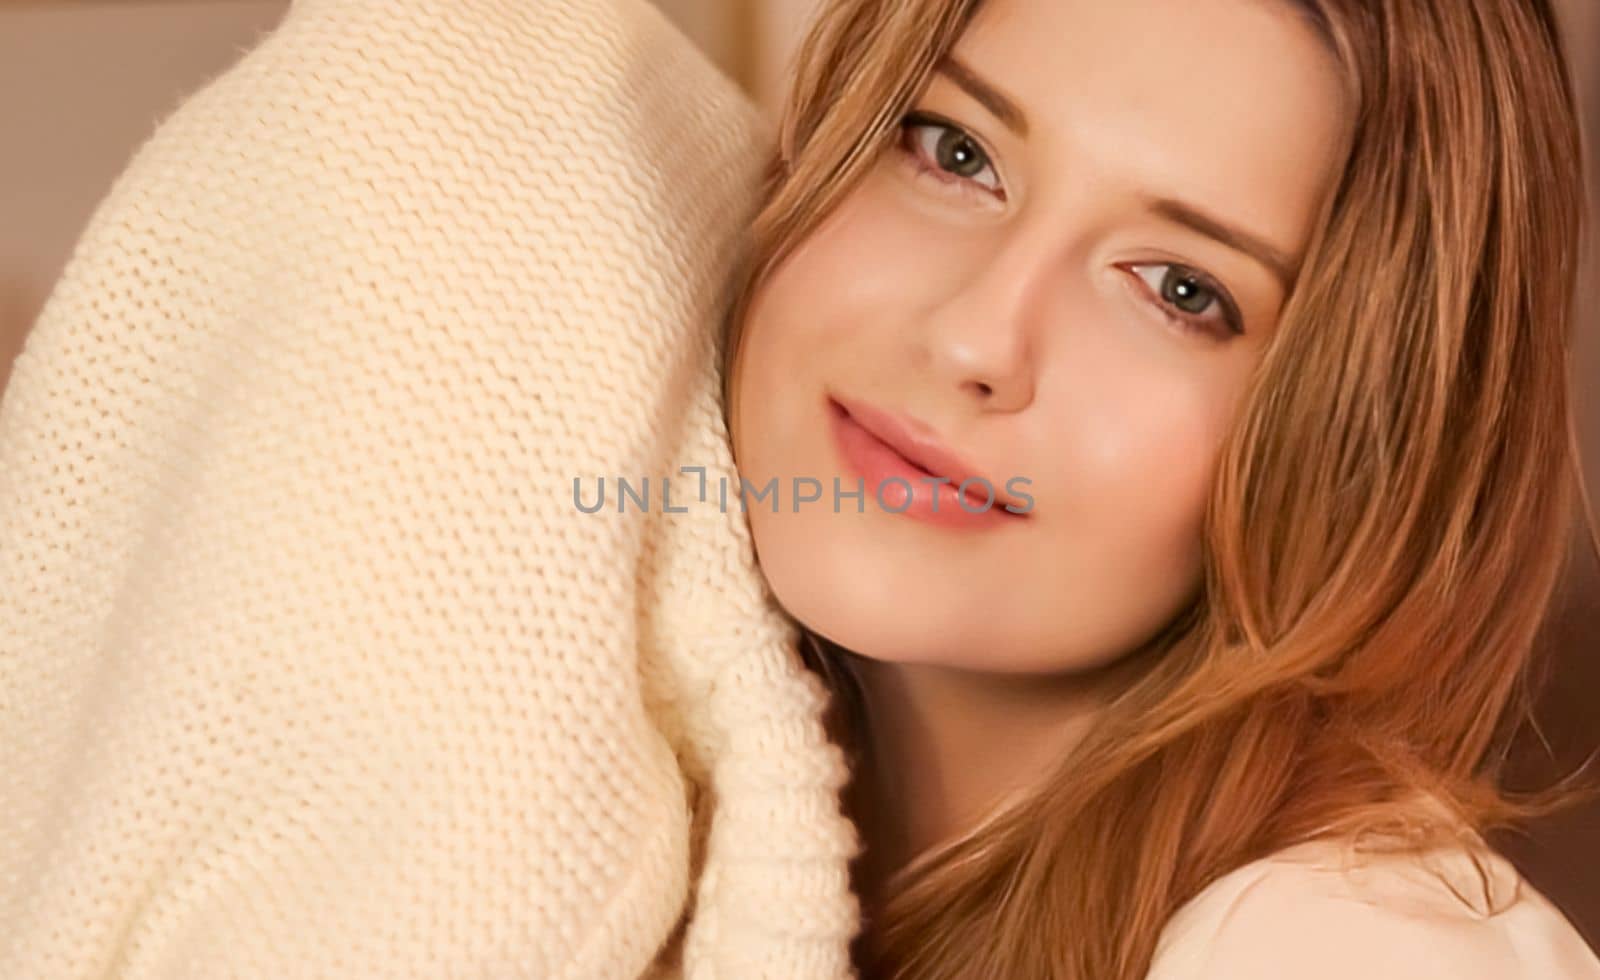 Woman enjoying warm and soft knitted clothing fabric material at home, laundry and comfort by Anneleven